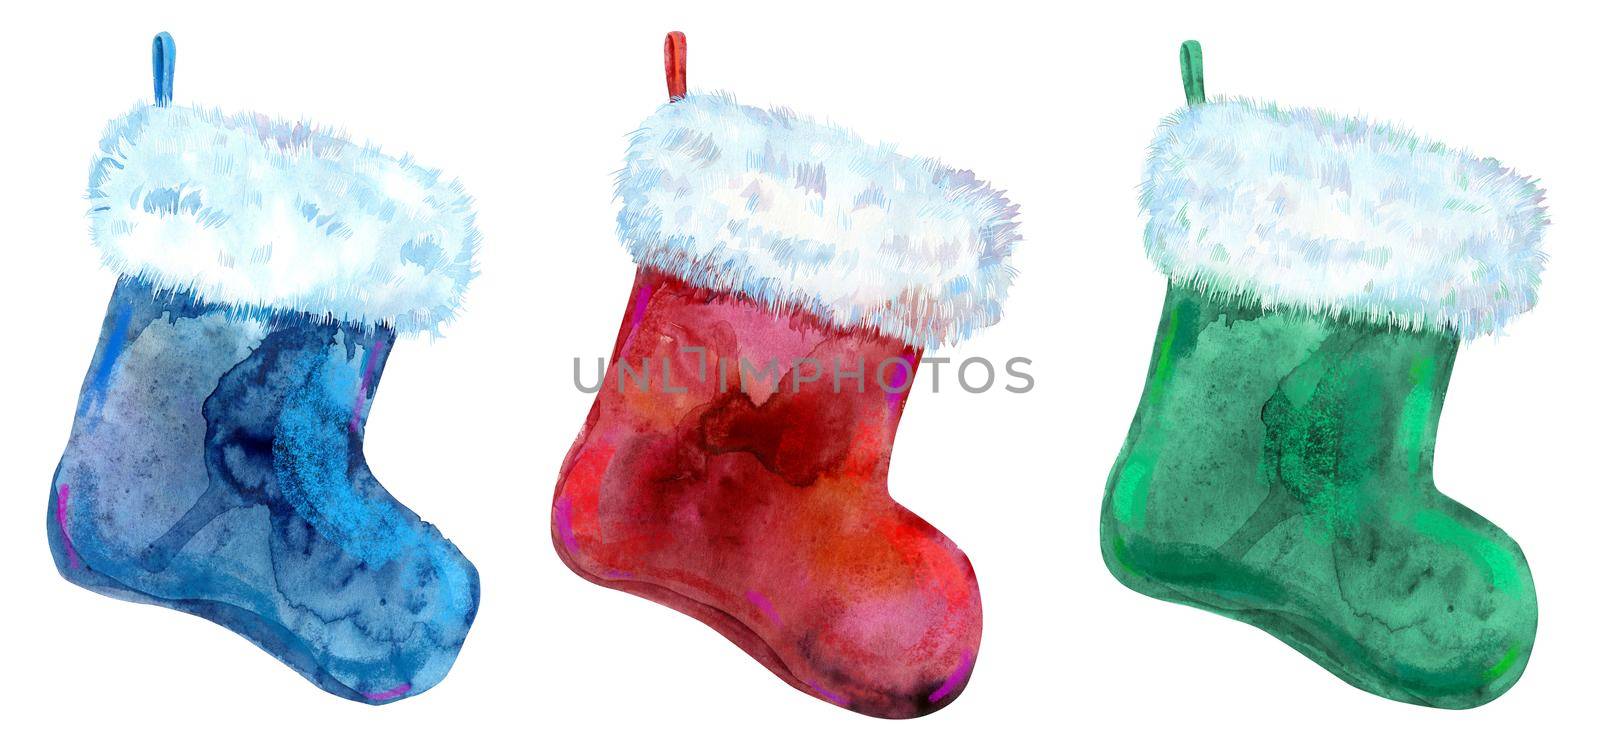 Christmas colorfull socks for gifts isolated on white background. Watercolor hand drawn illustration